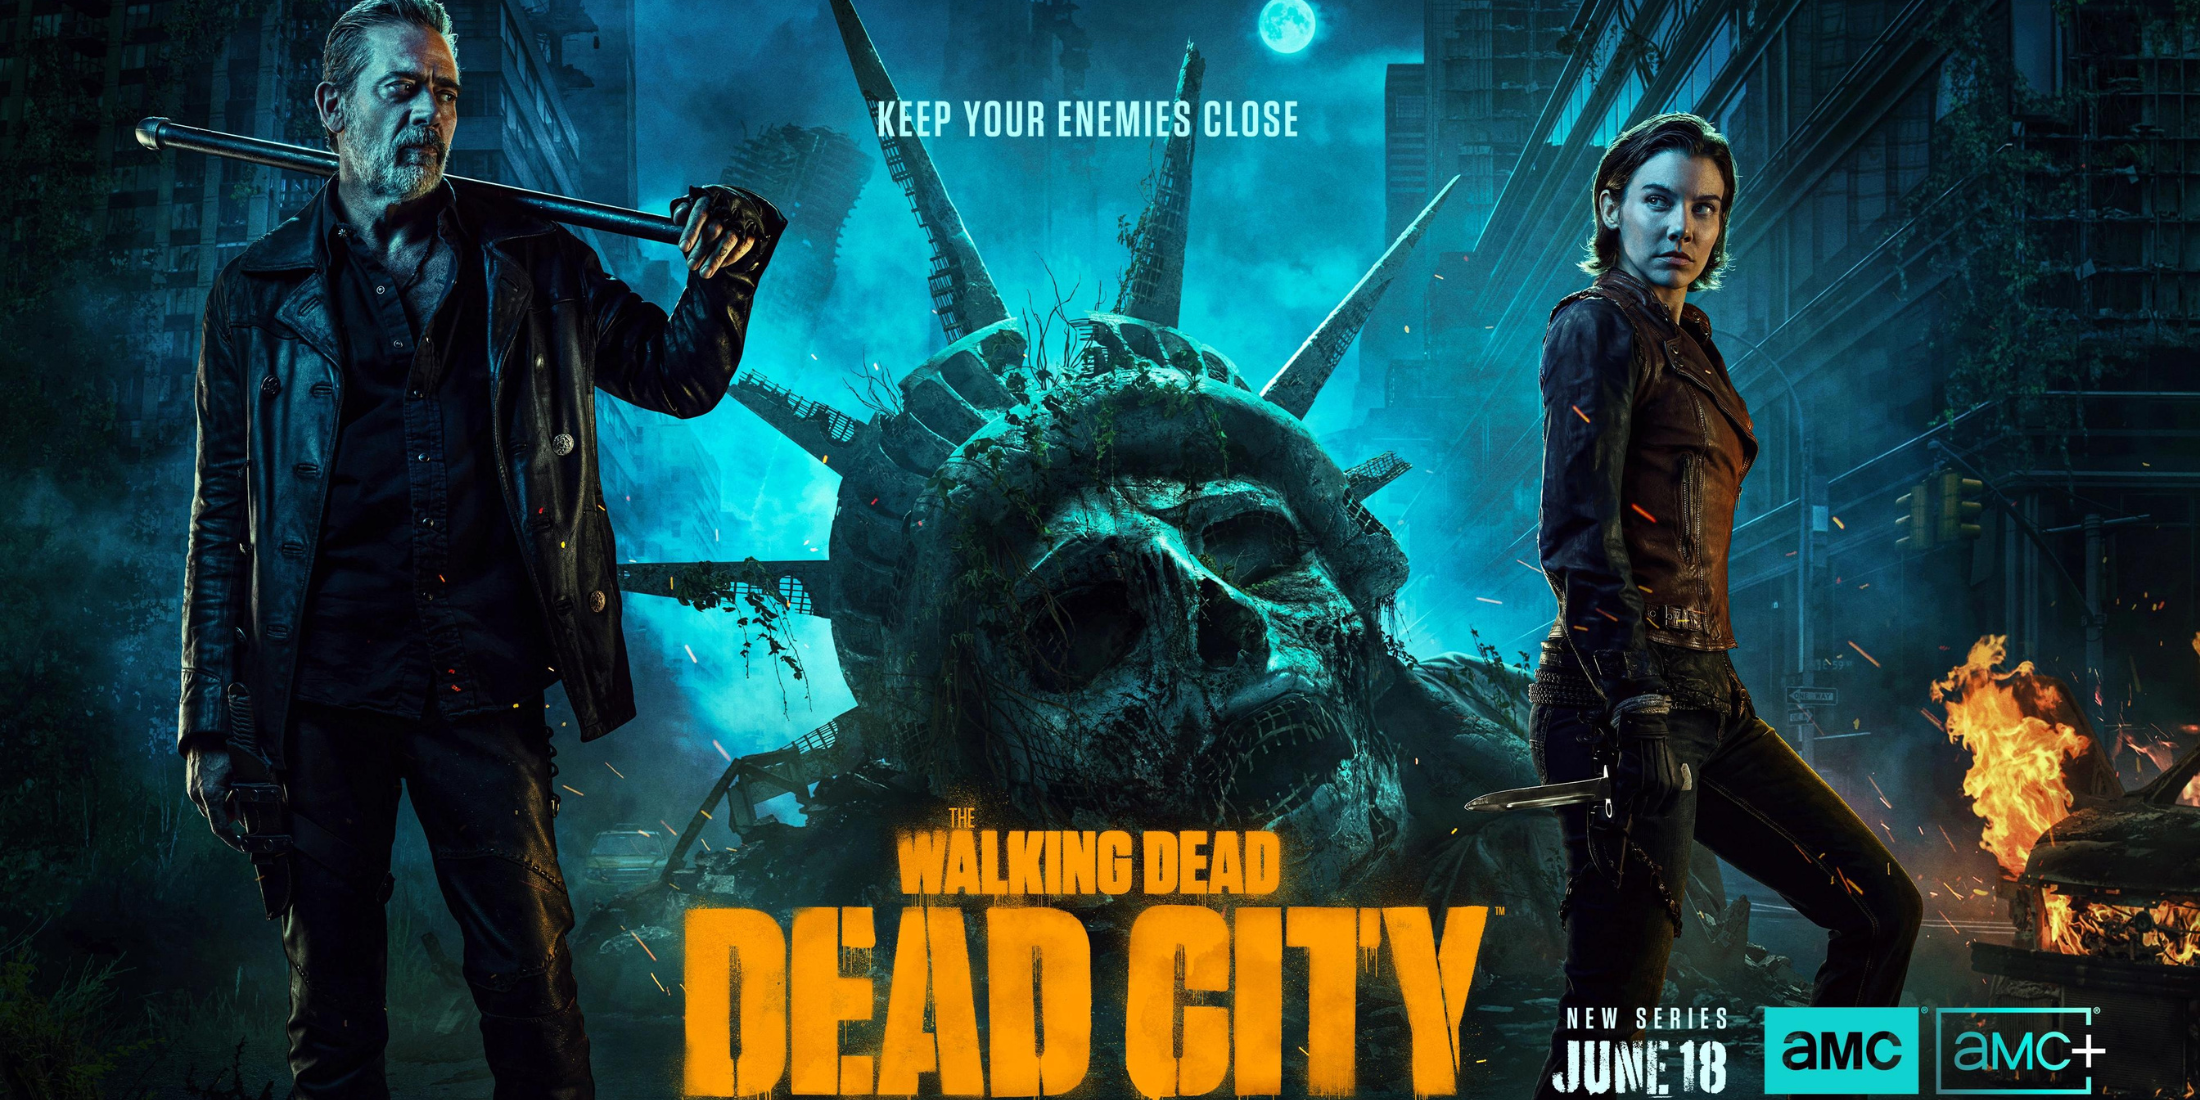 The Walking Dead: Dead City Trailer Takes Us to a Walker-Infested Manhattan with an Unlikely Team-Up